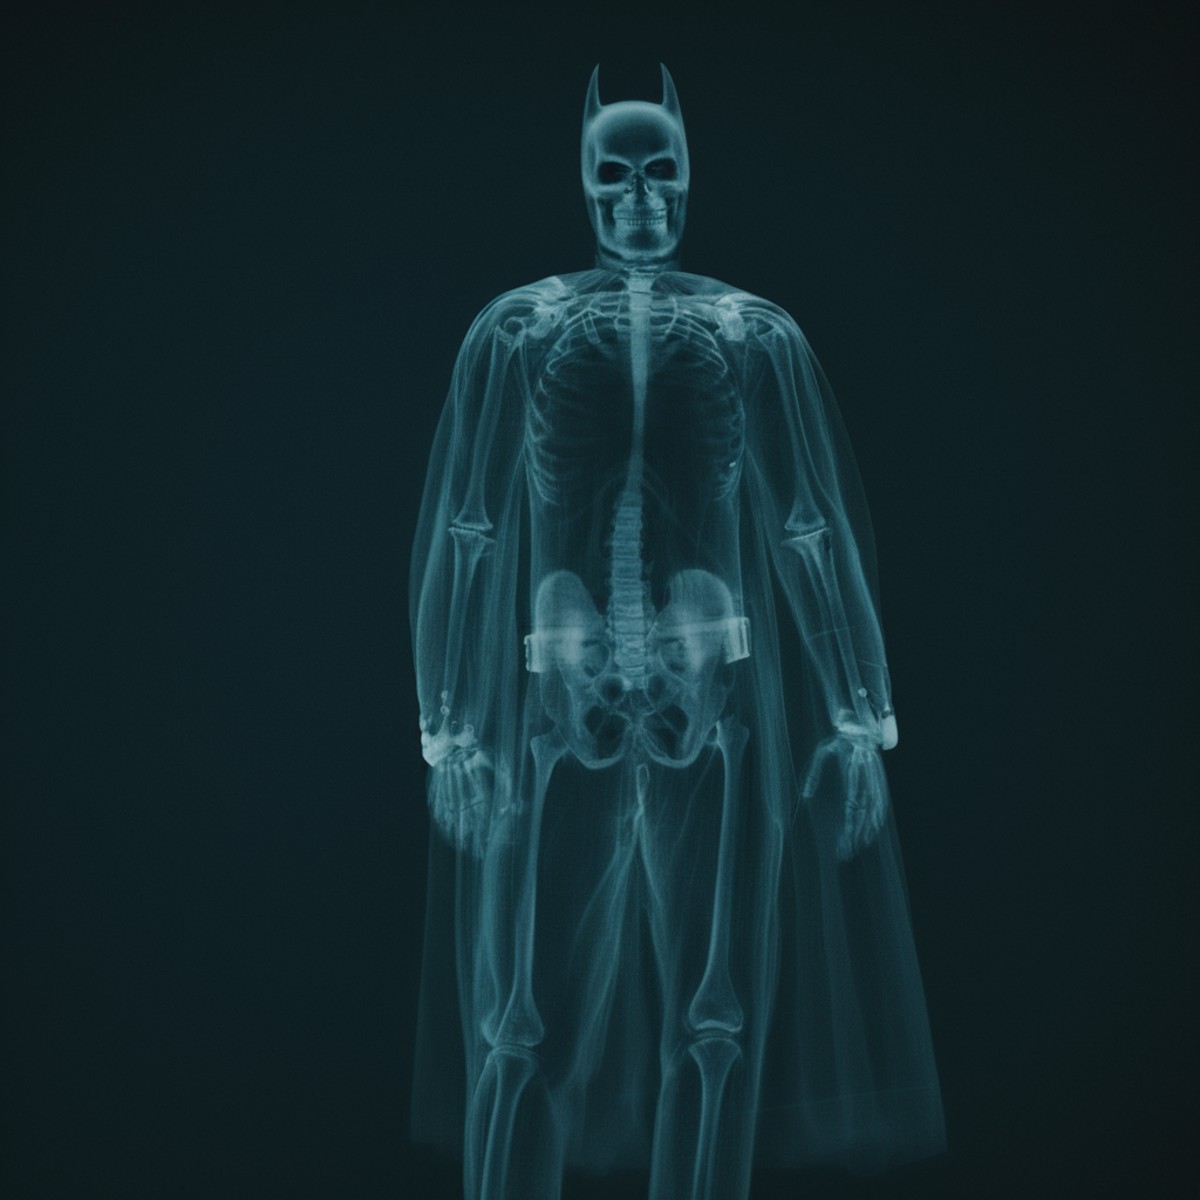 cinematic film still of  <lora:x-ray style:1> X-ray of
skeleton of batman
,x-ray style, shallow depth of field, vignette, ...